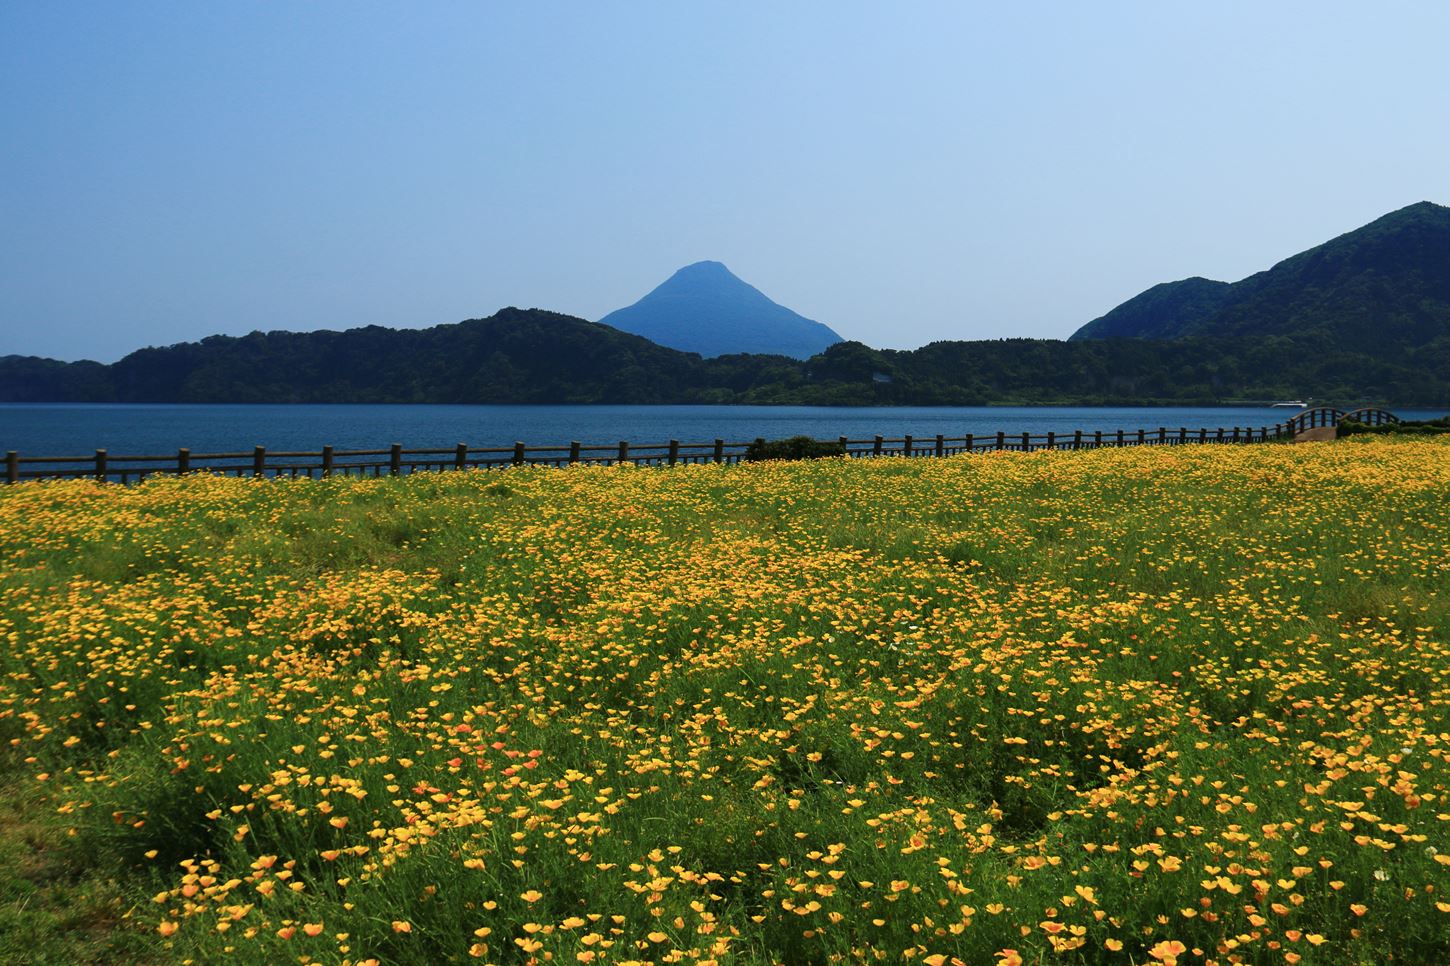 In the city of Ibusuki in the southern part of Kagoshima Prefecture, the rape blossoms begin to bloom in mid-December every year, creating a beautiful contrast with Mt. Kaimon, which is shaped like Mt. Fuji. =Shutterstock